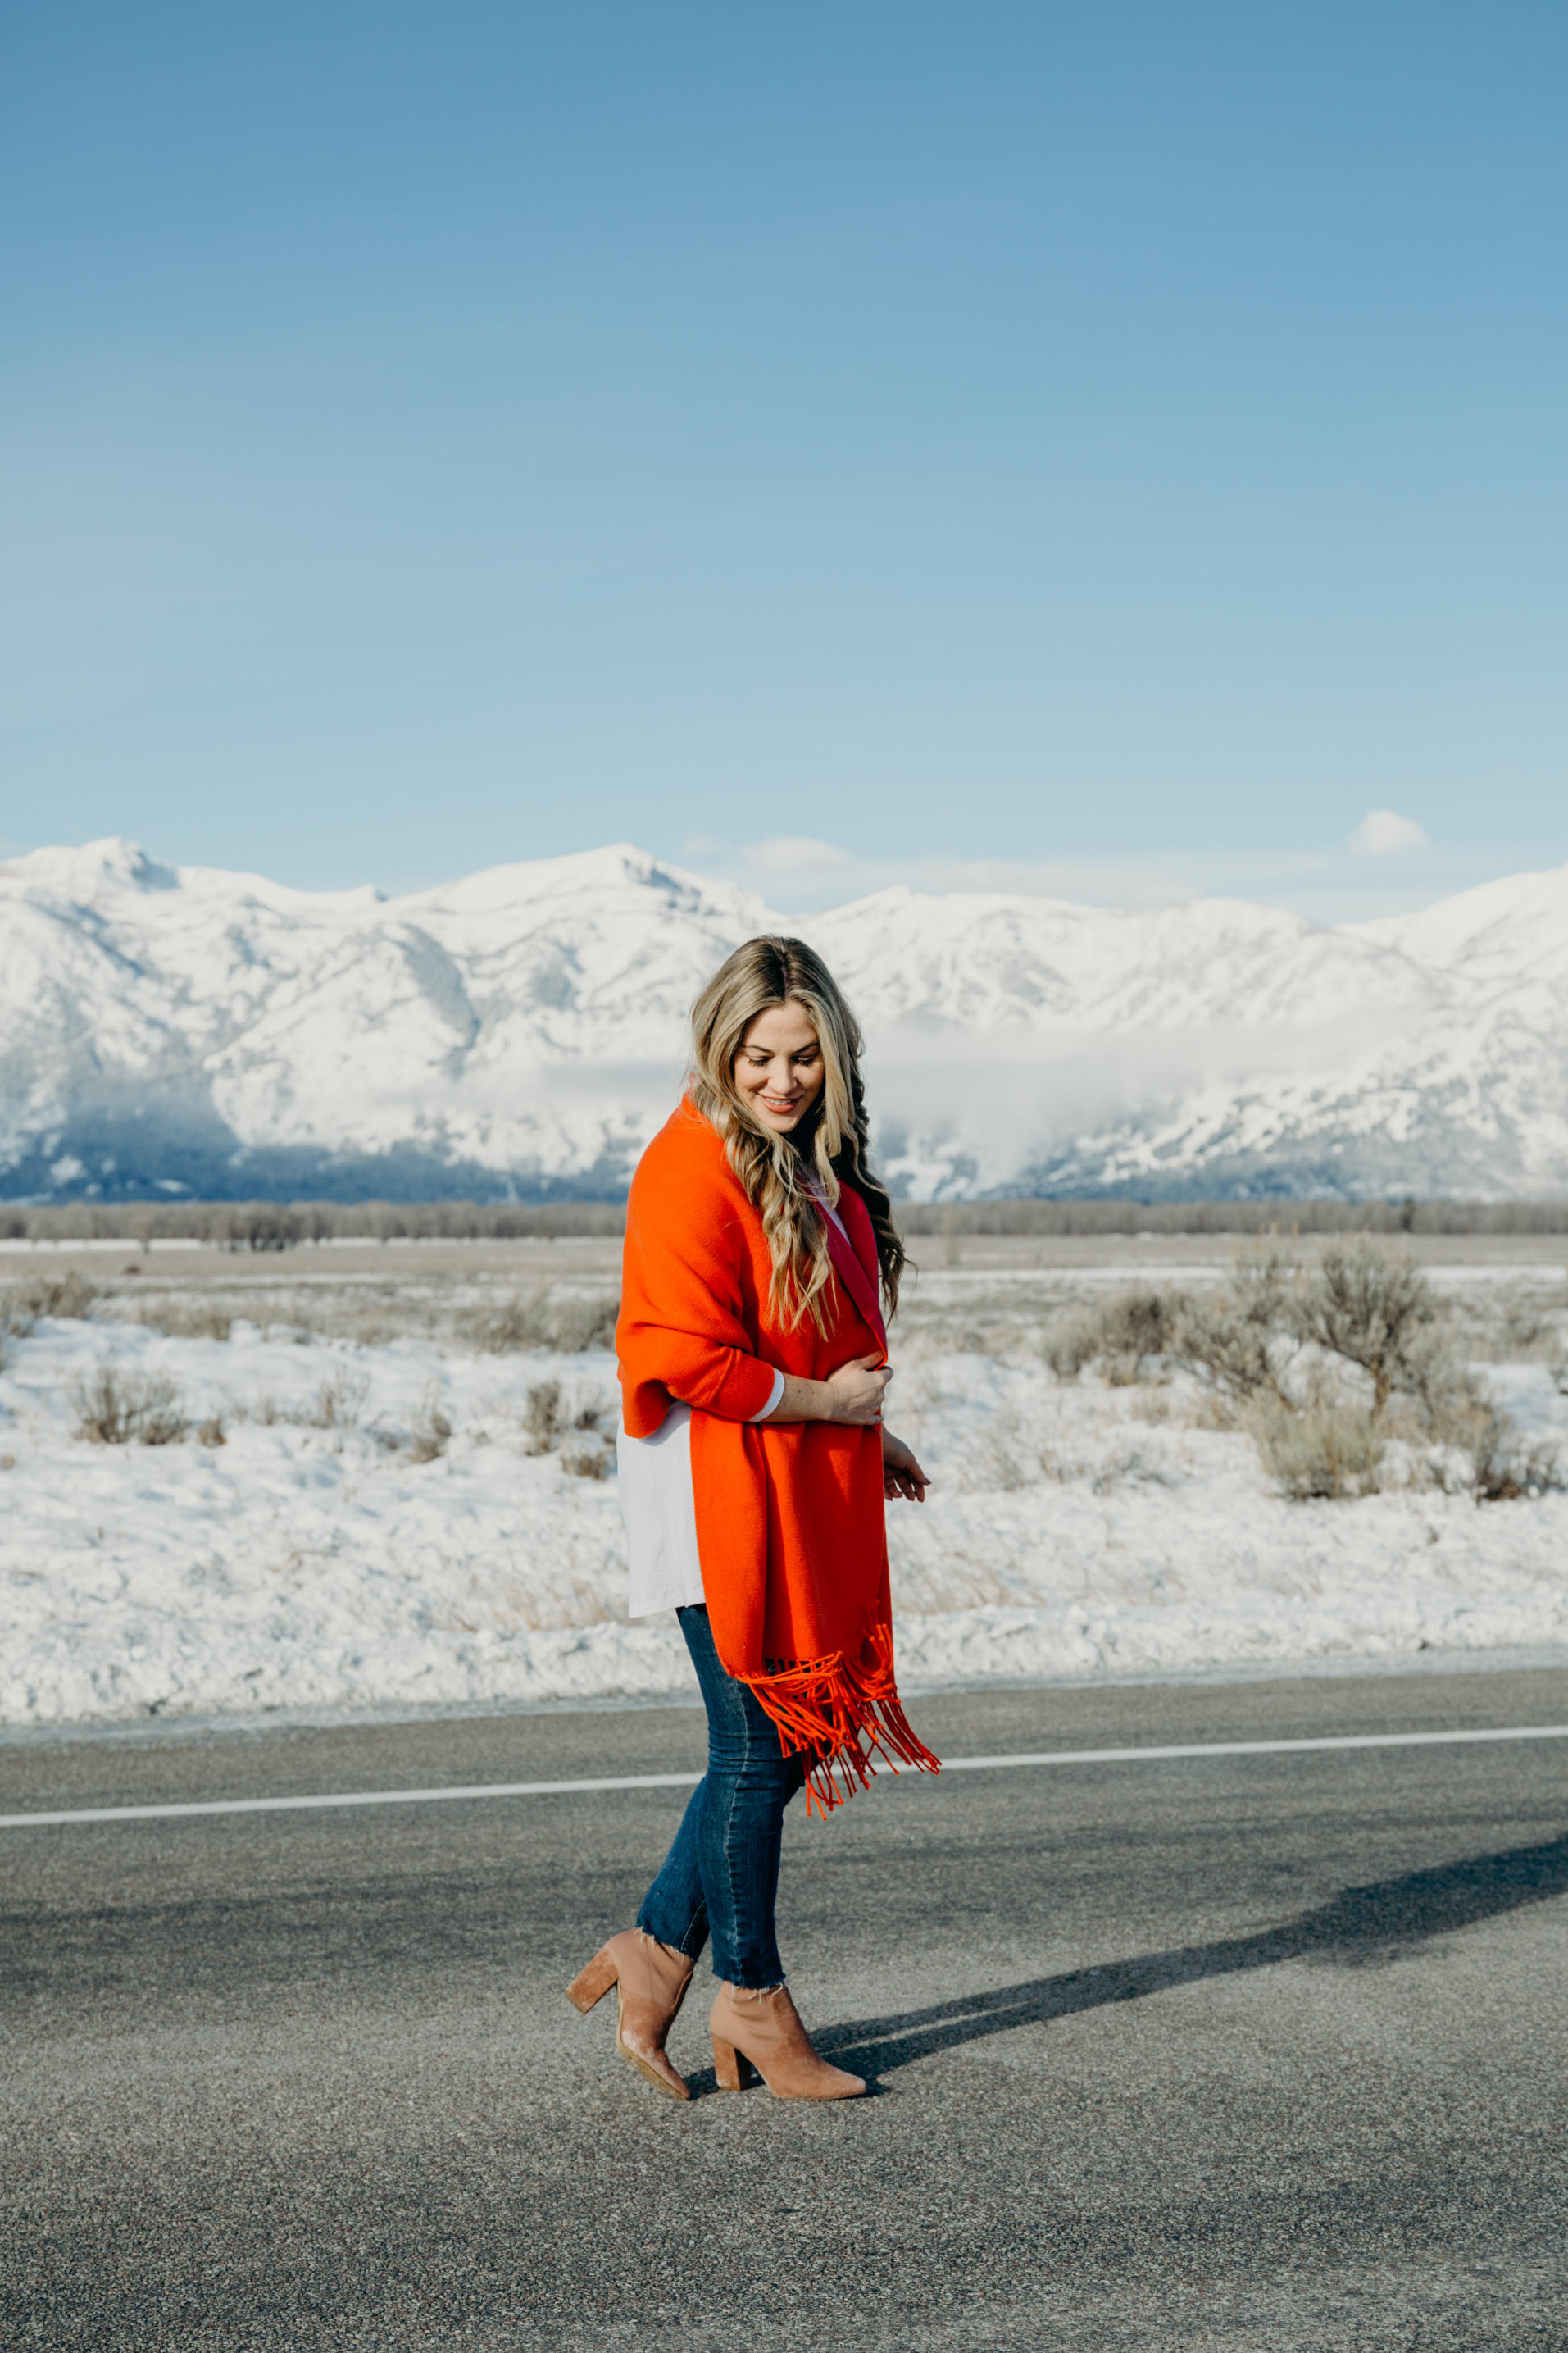 Bright Clothing for Winter featured by top US fashion blog, Walking in Memphis in High Heels: image of a woman wearing a reversible travel wrap